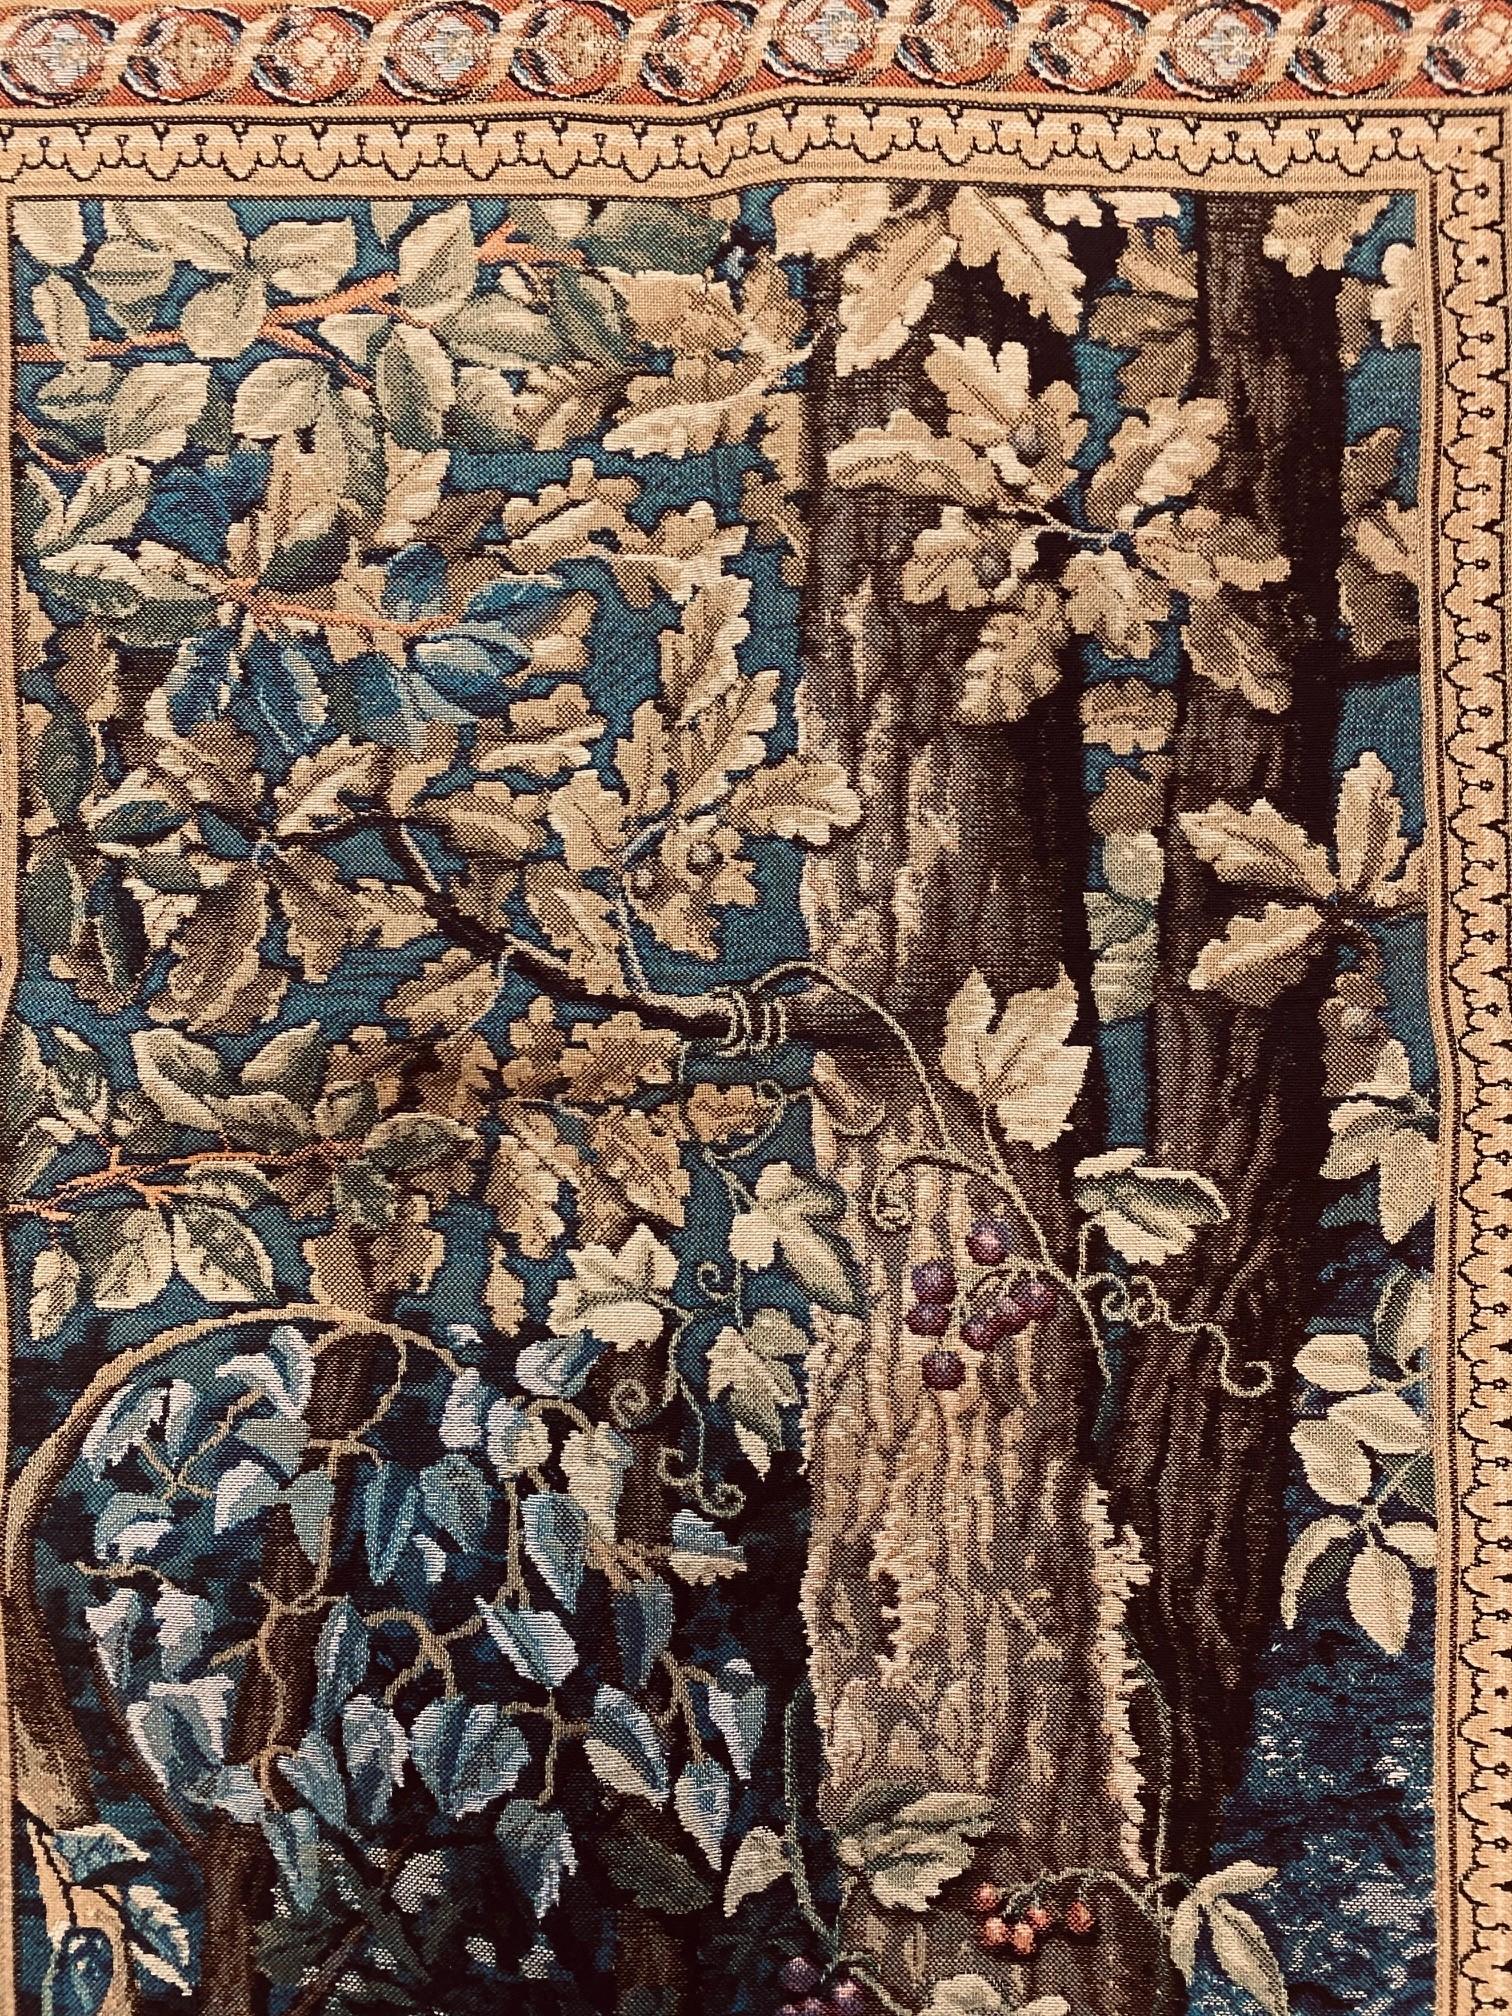 Inspired by Arcadian landscapes.  Belgian made,  jacquard woven with relief stitch. Fully lined with rod pocket for hanging.
Cotton and rayon.
Measurements are approximate.
